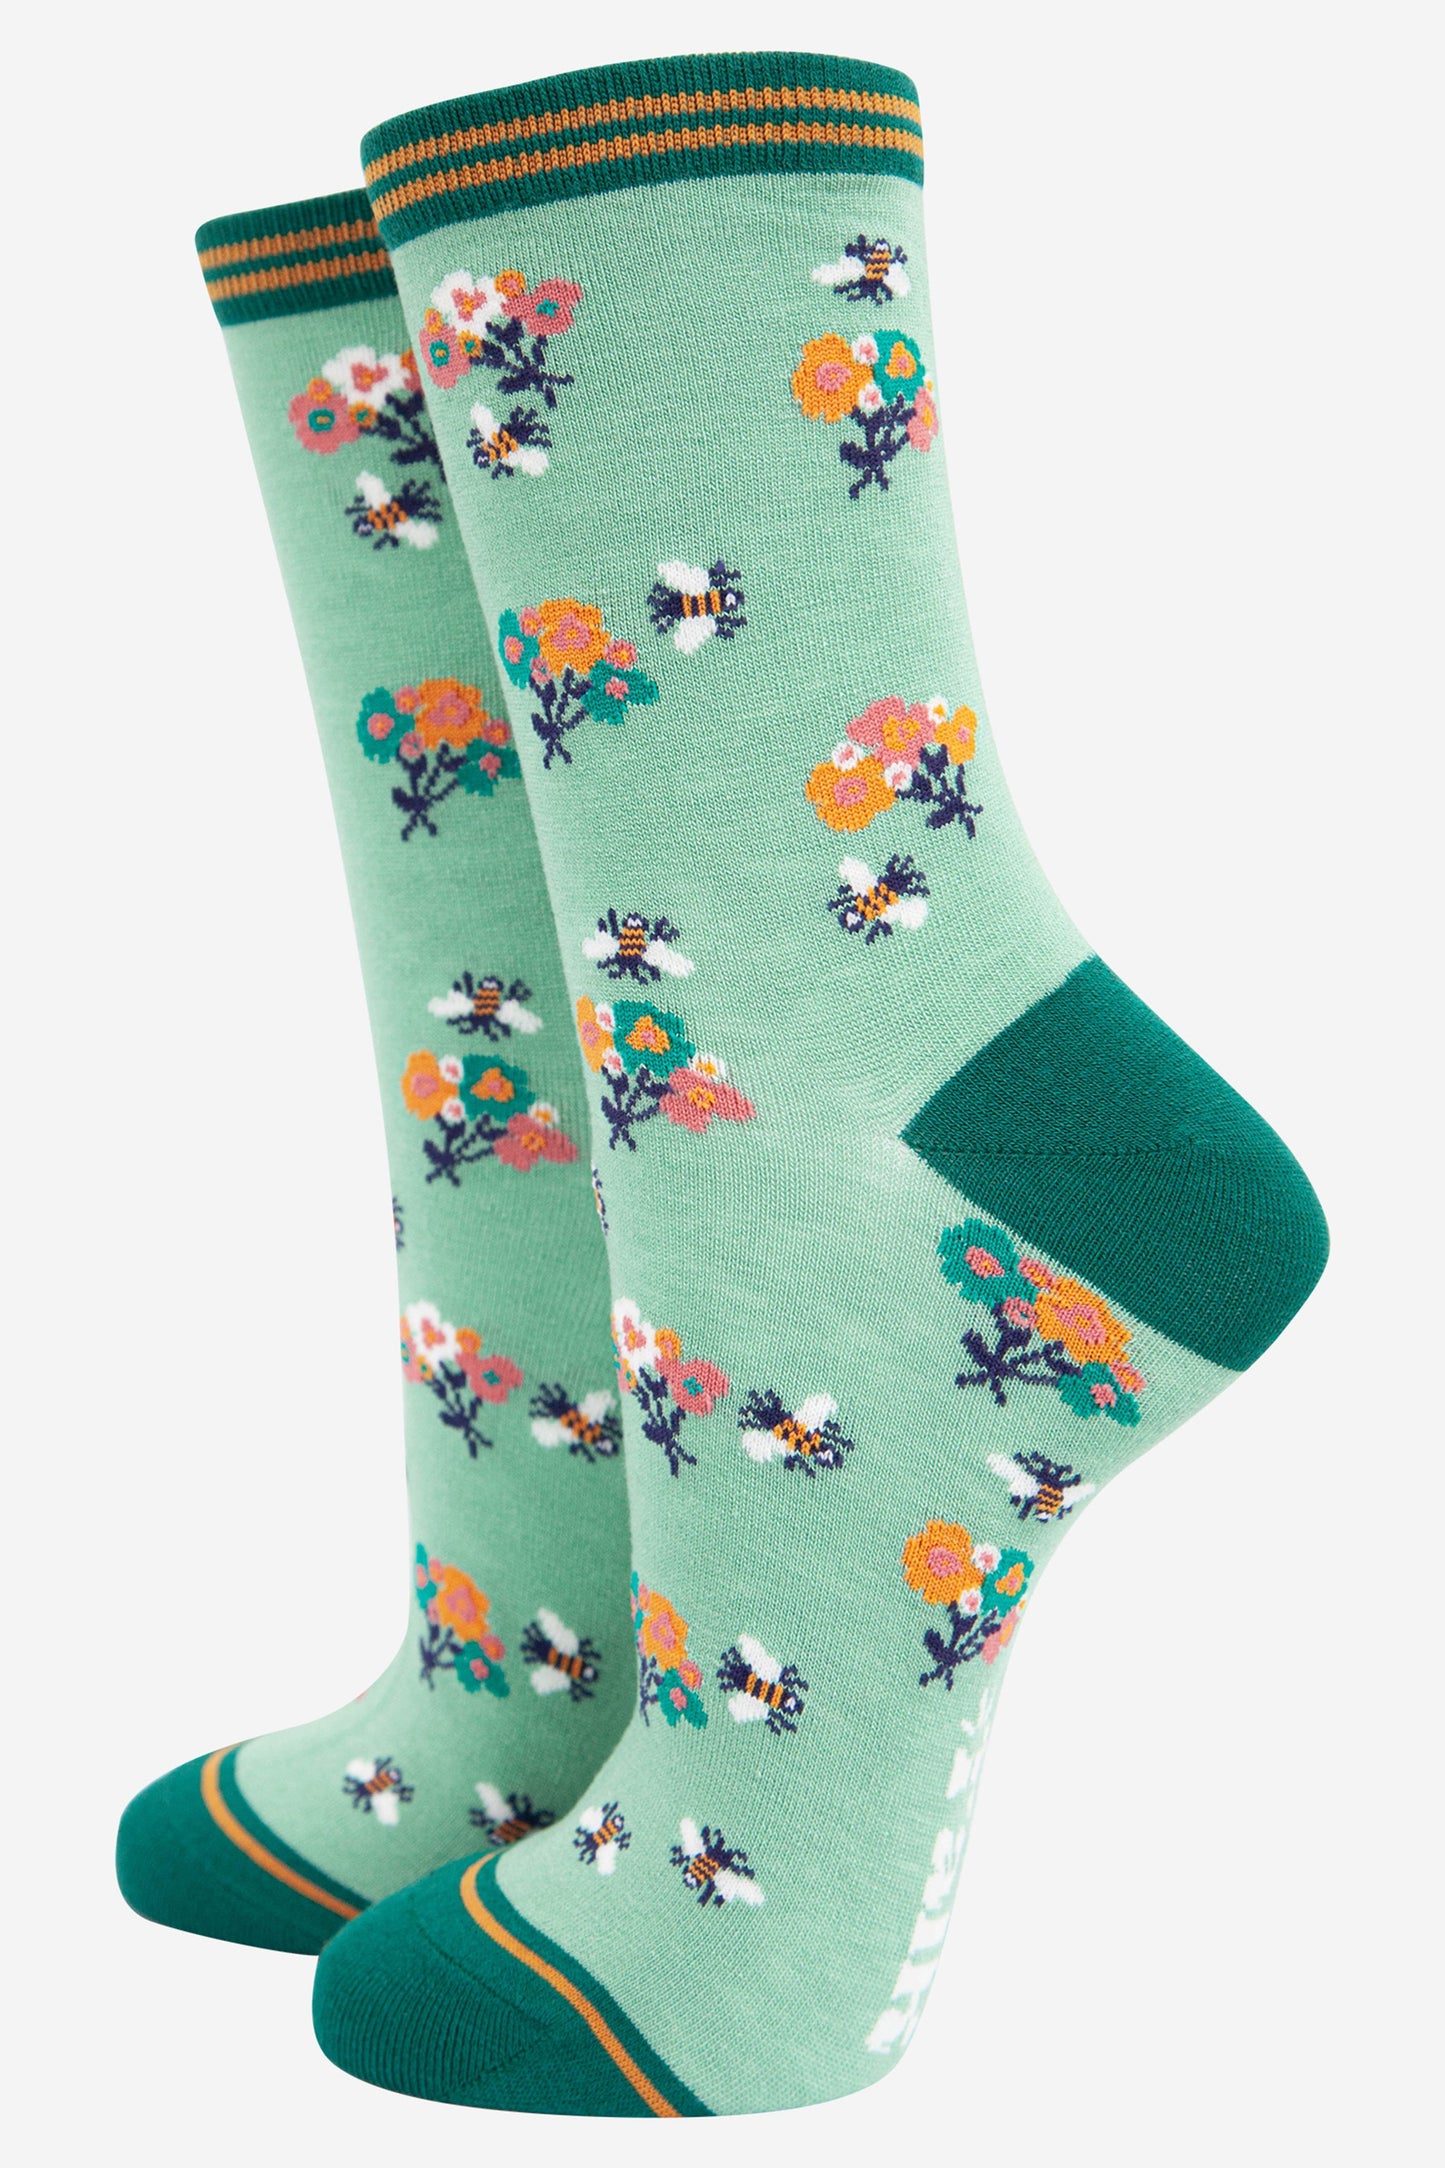 green bamboo ankle socks with an all over bee and floral posey pattern